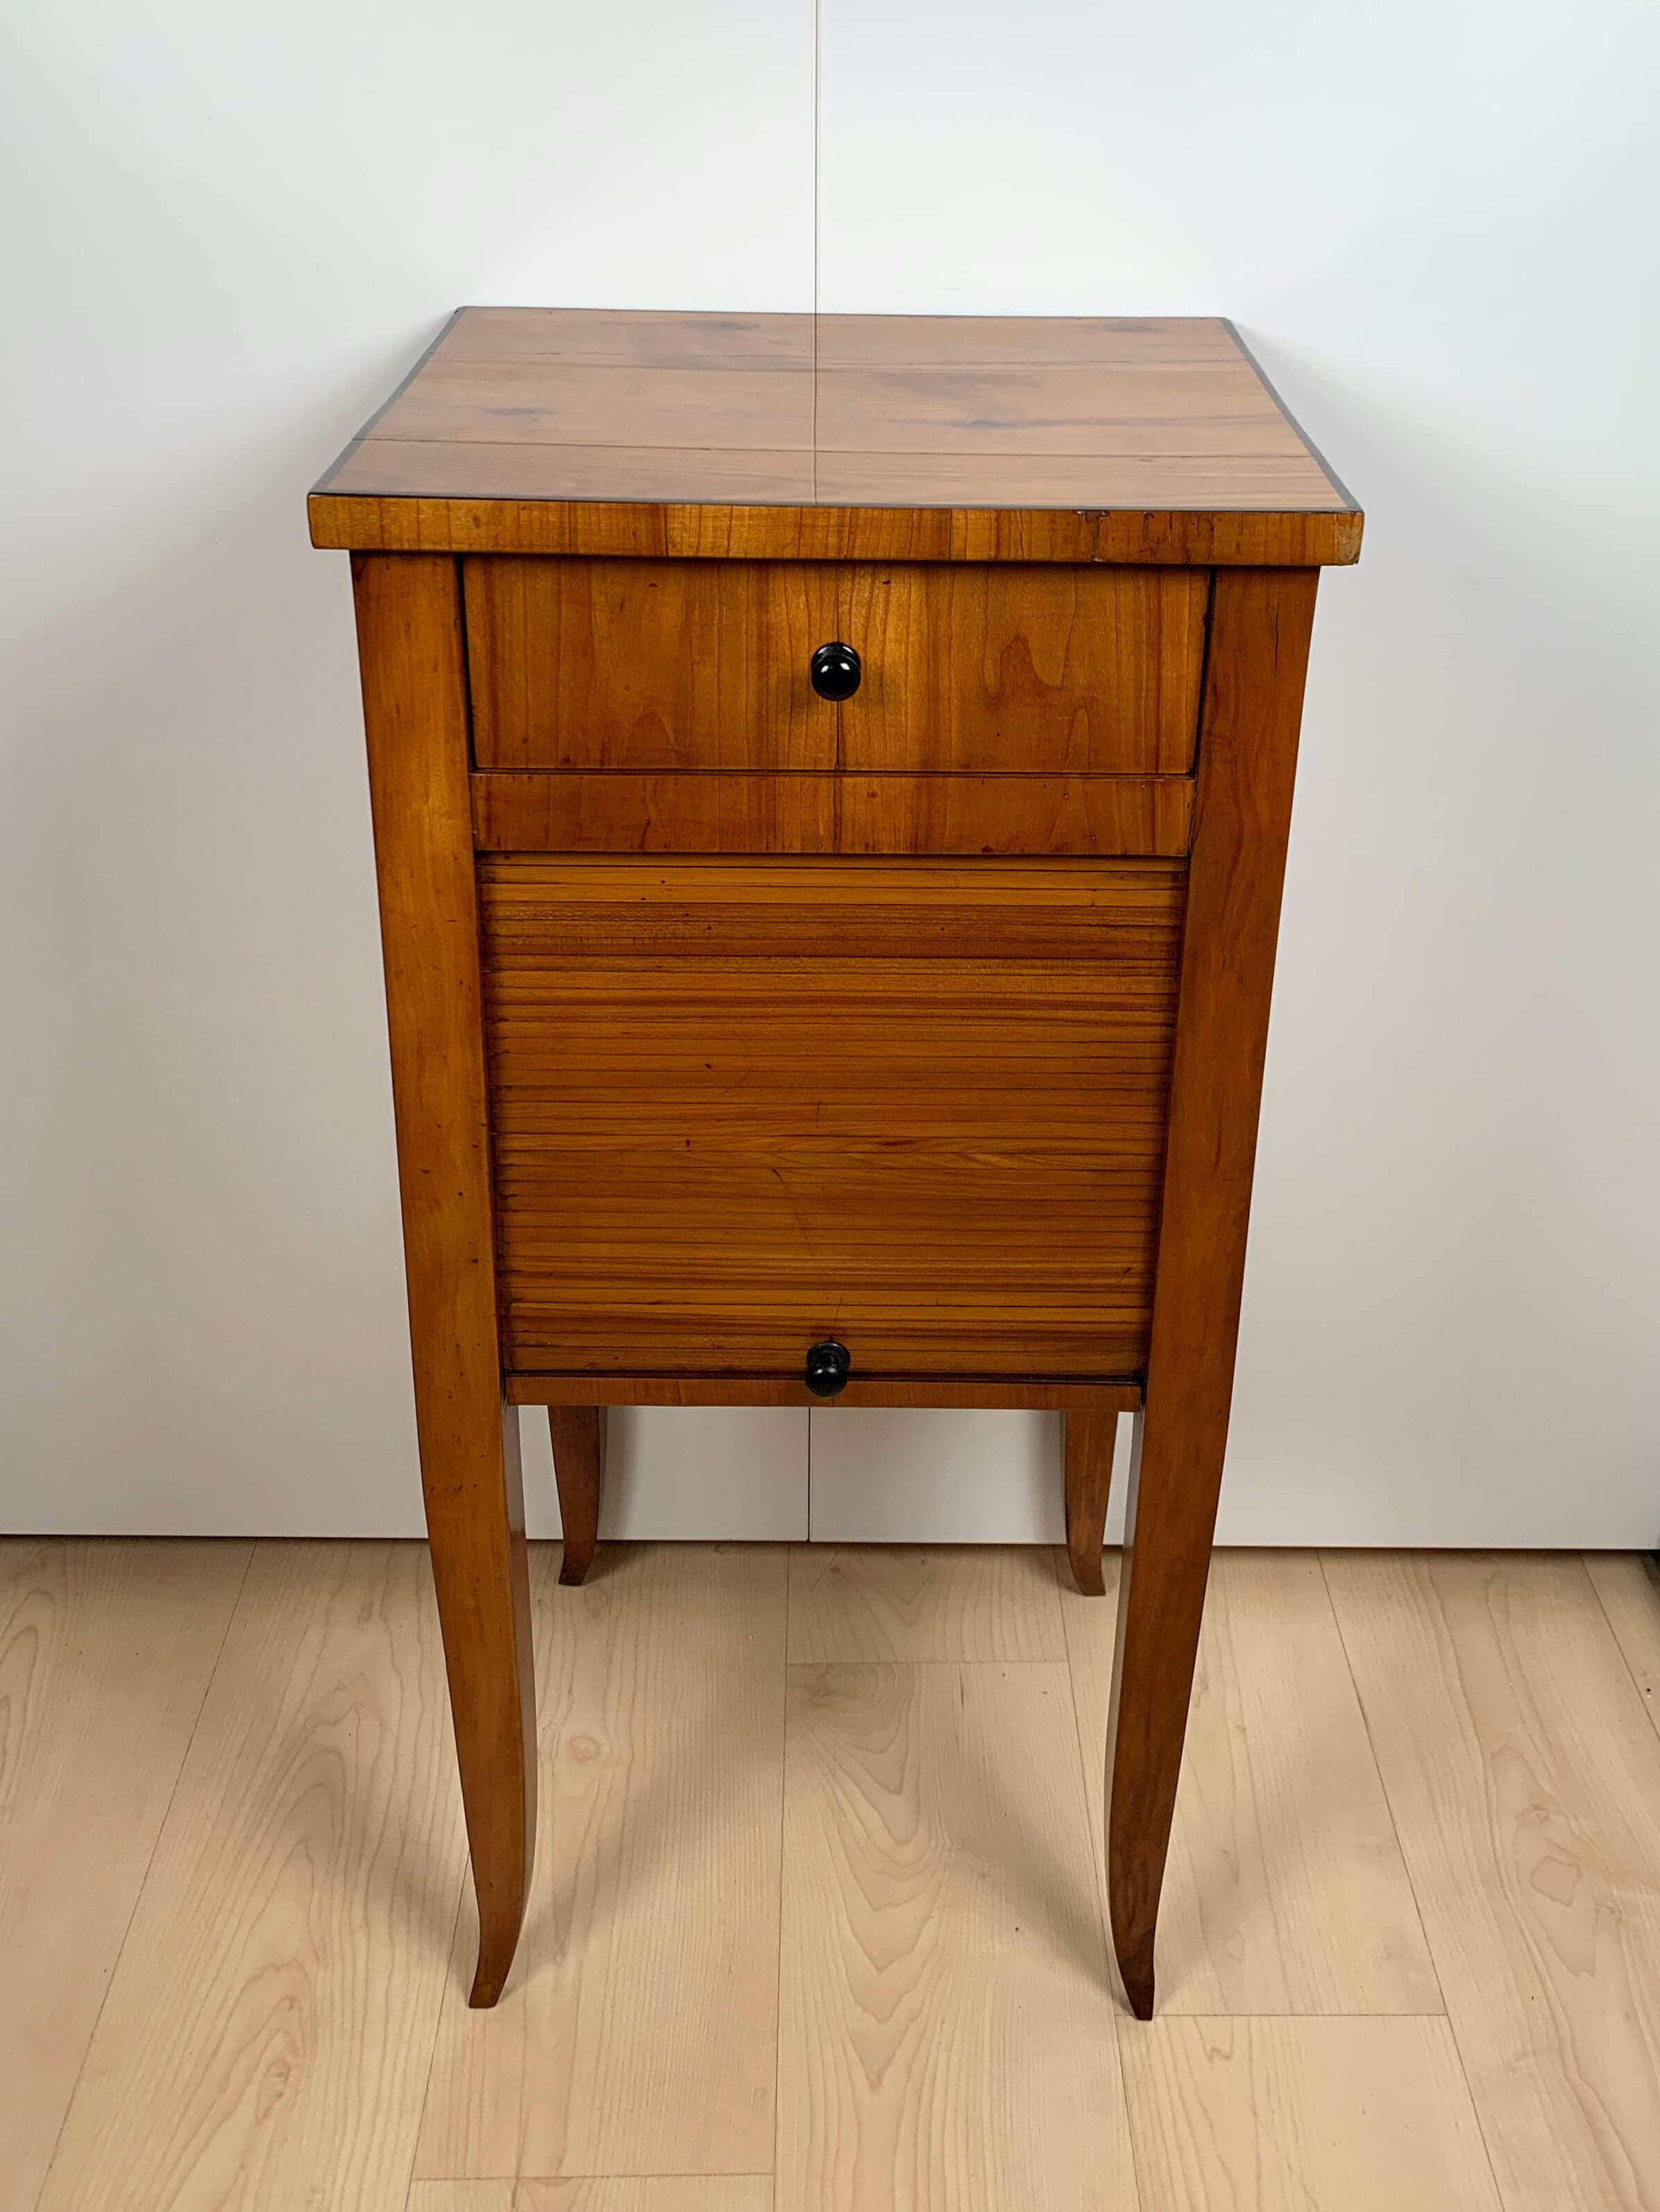 Wonderful, restored Biedermeier small furniture / pillar cabinet / Nightstand in bright Cherry Veneer from South Germany around 1820.

One drawer and one roller shutter at the front. Four sides and top in cherry veneer on softwood. Ebony trim